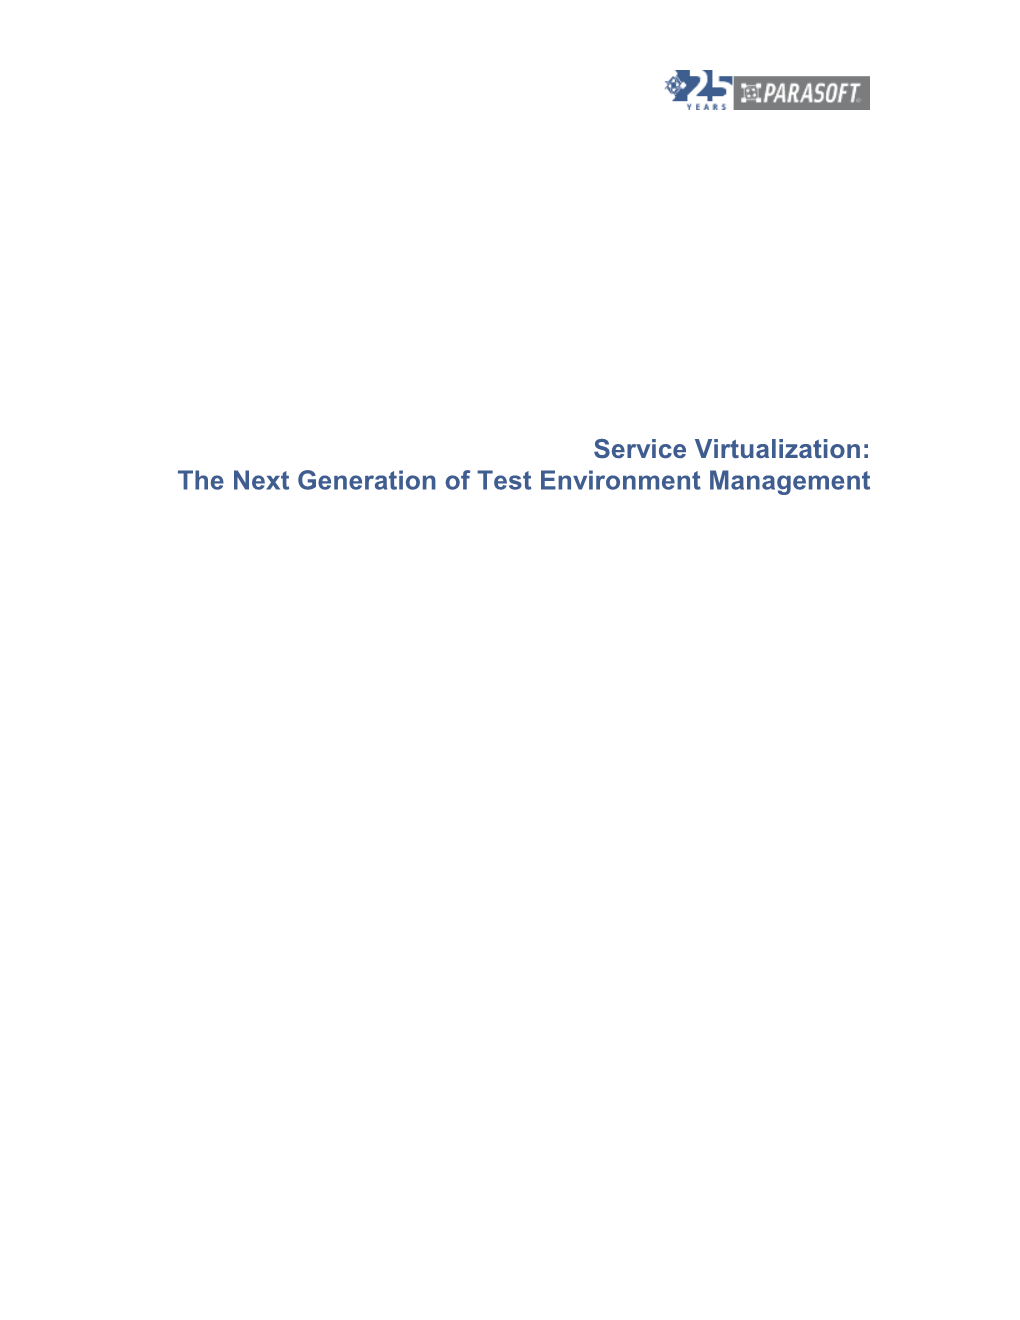 The Next Generation of Test Environment Management